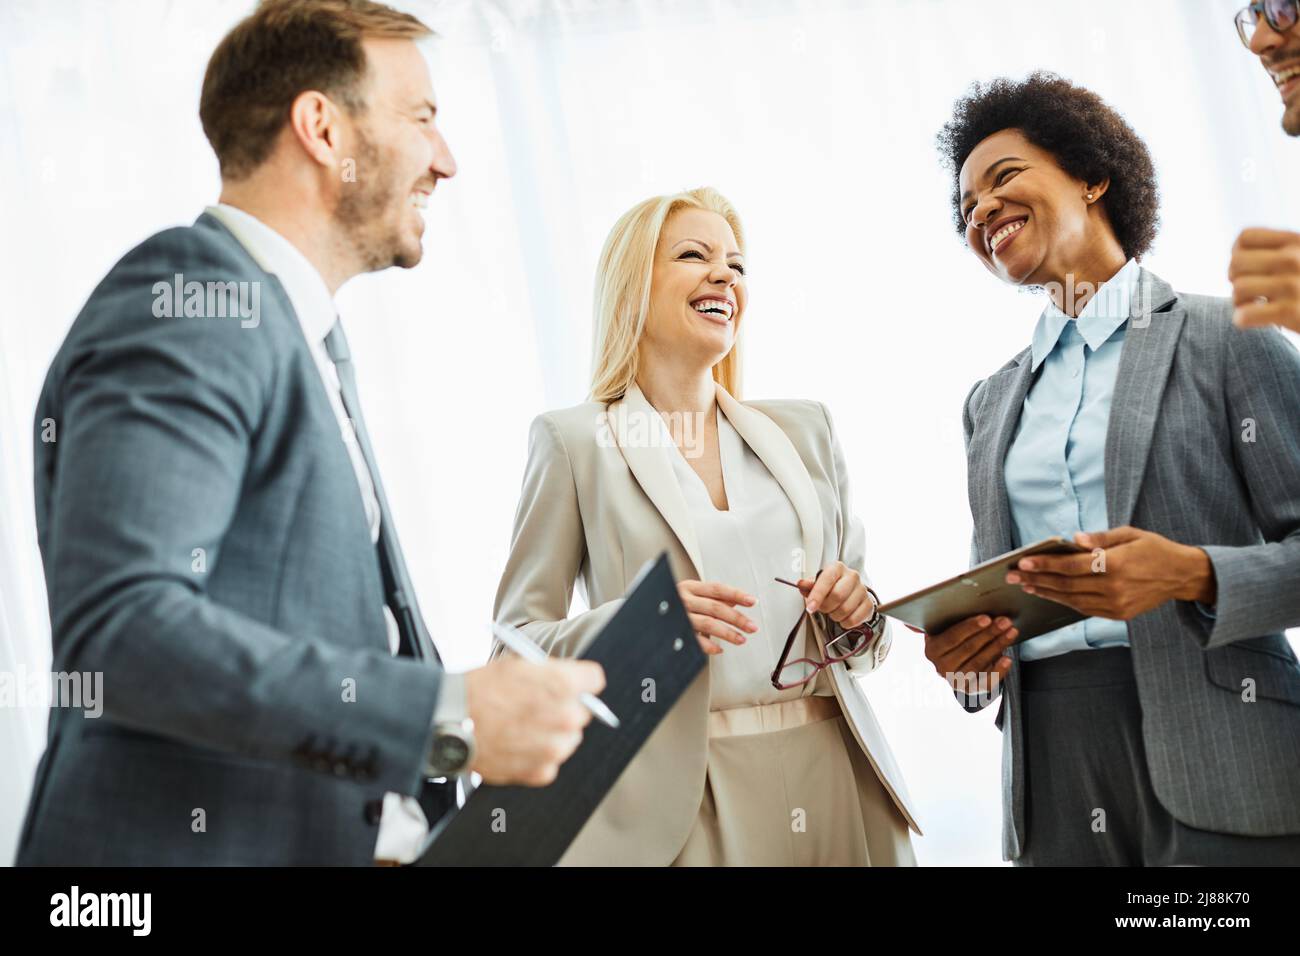 young business people meeting office teamwork group success corporate discussion Stock Photo